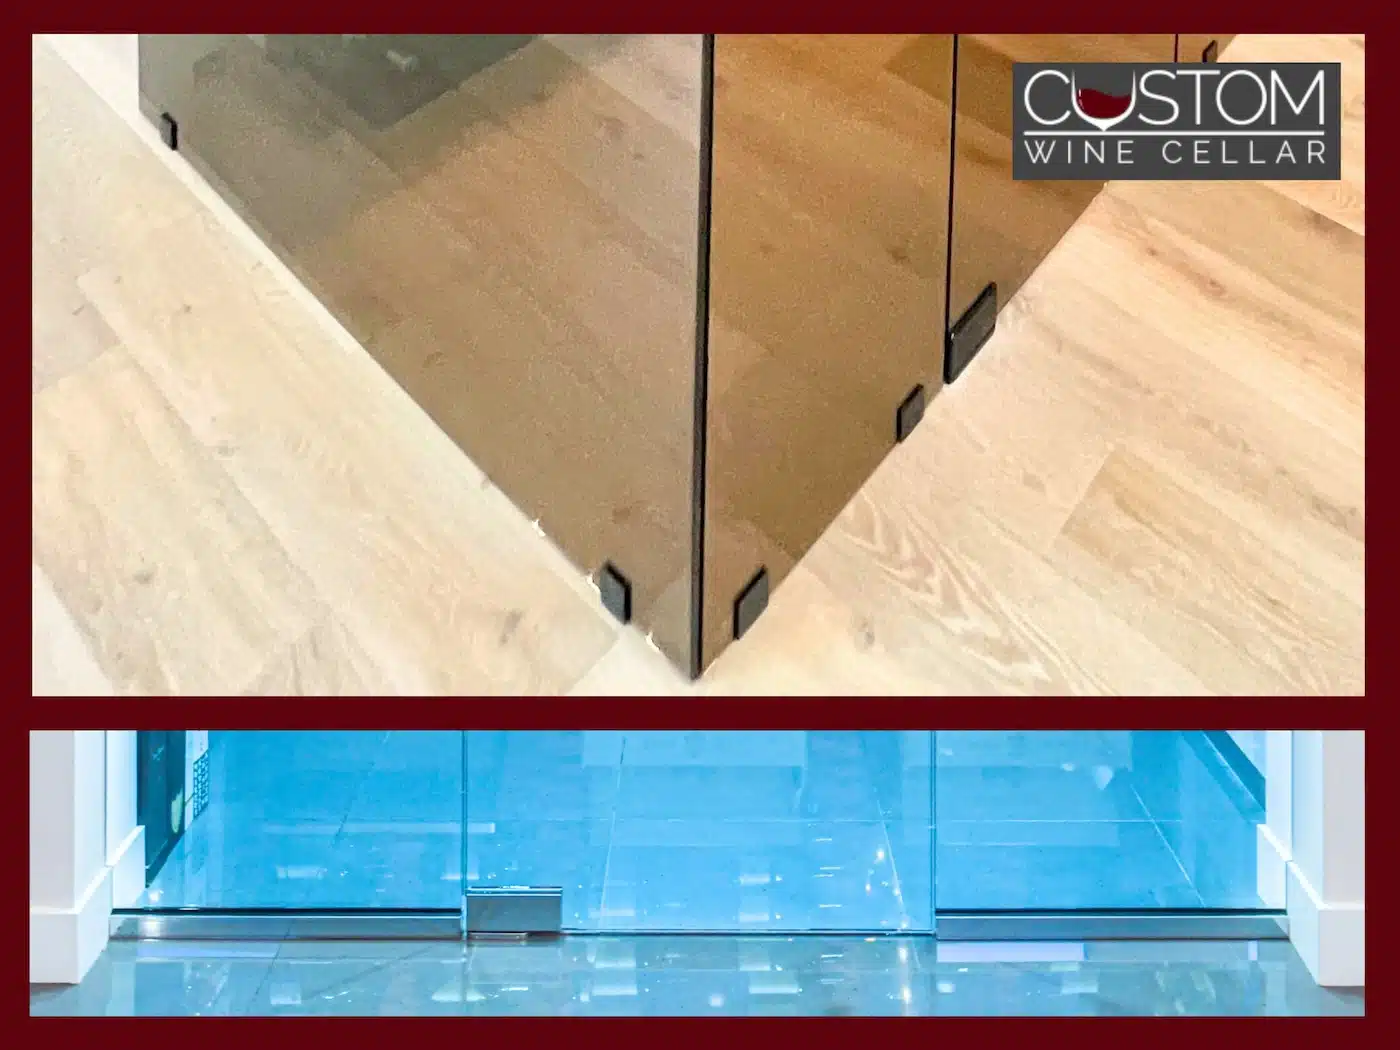 Matte black and chrome stoppers that secure frameless glass panels in place inside a wine cellar.